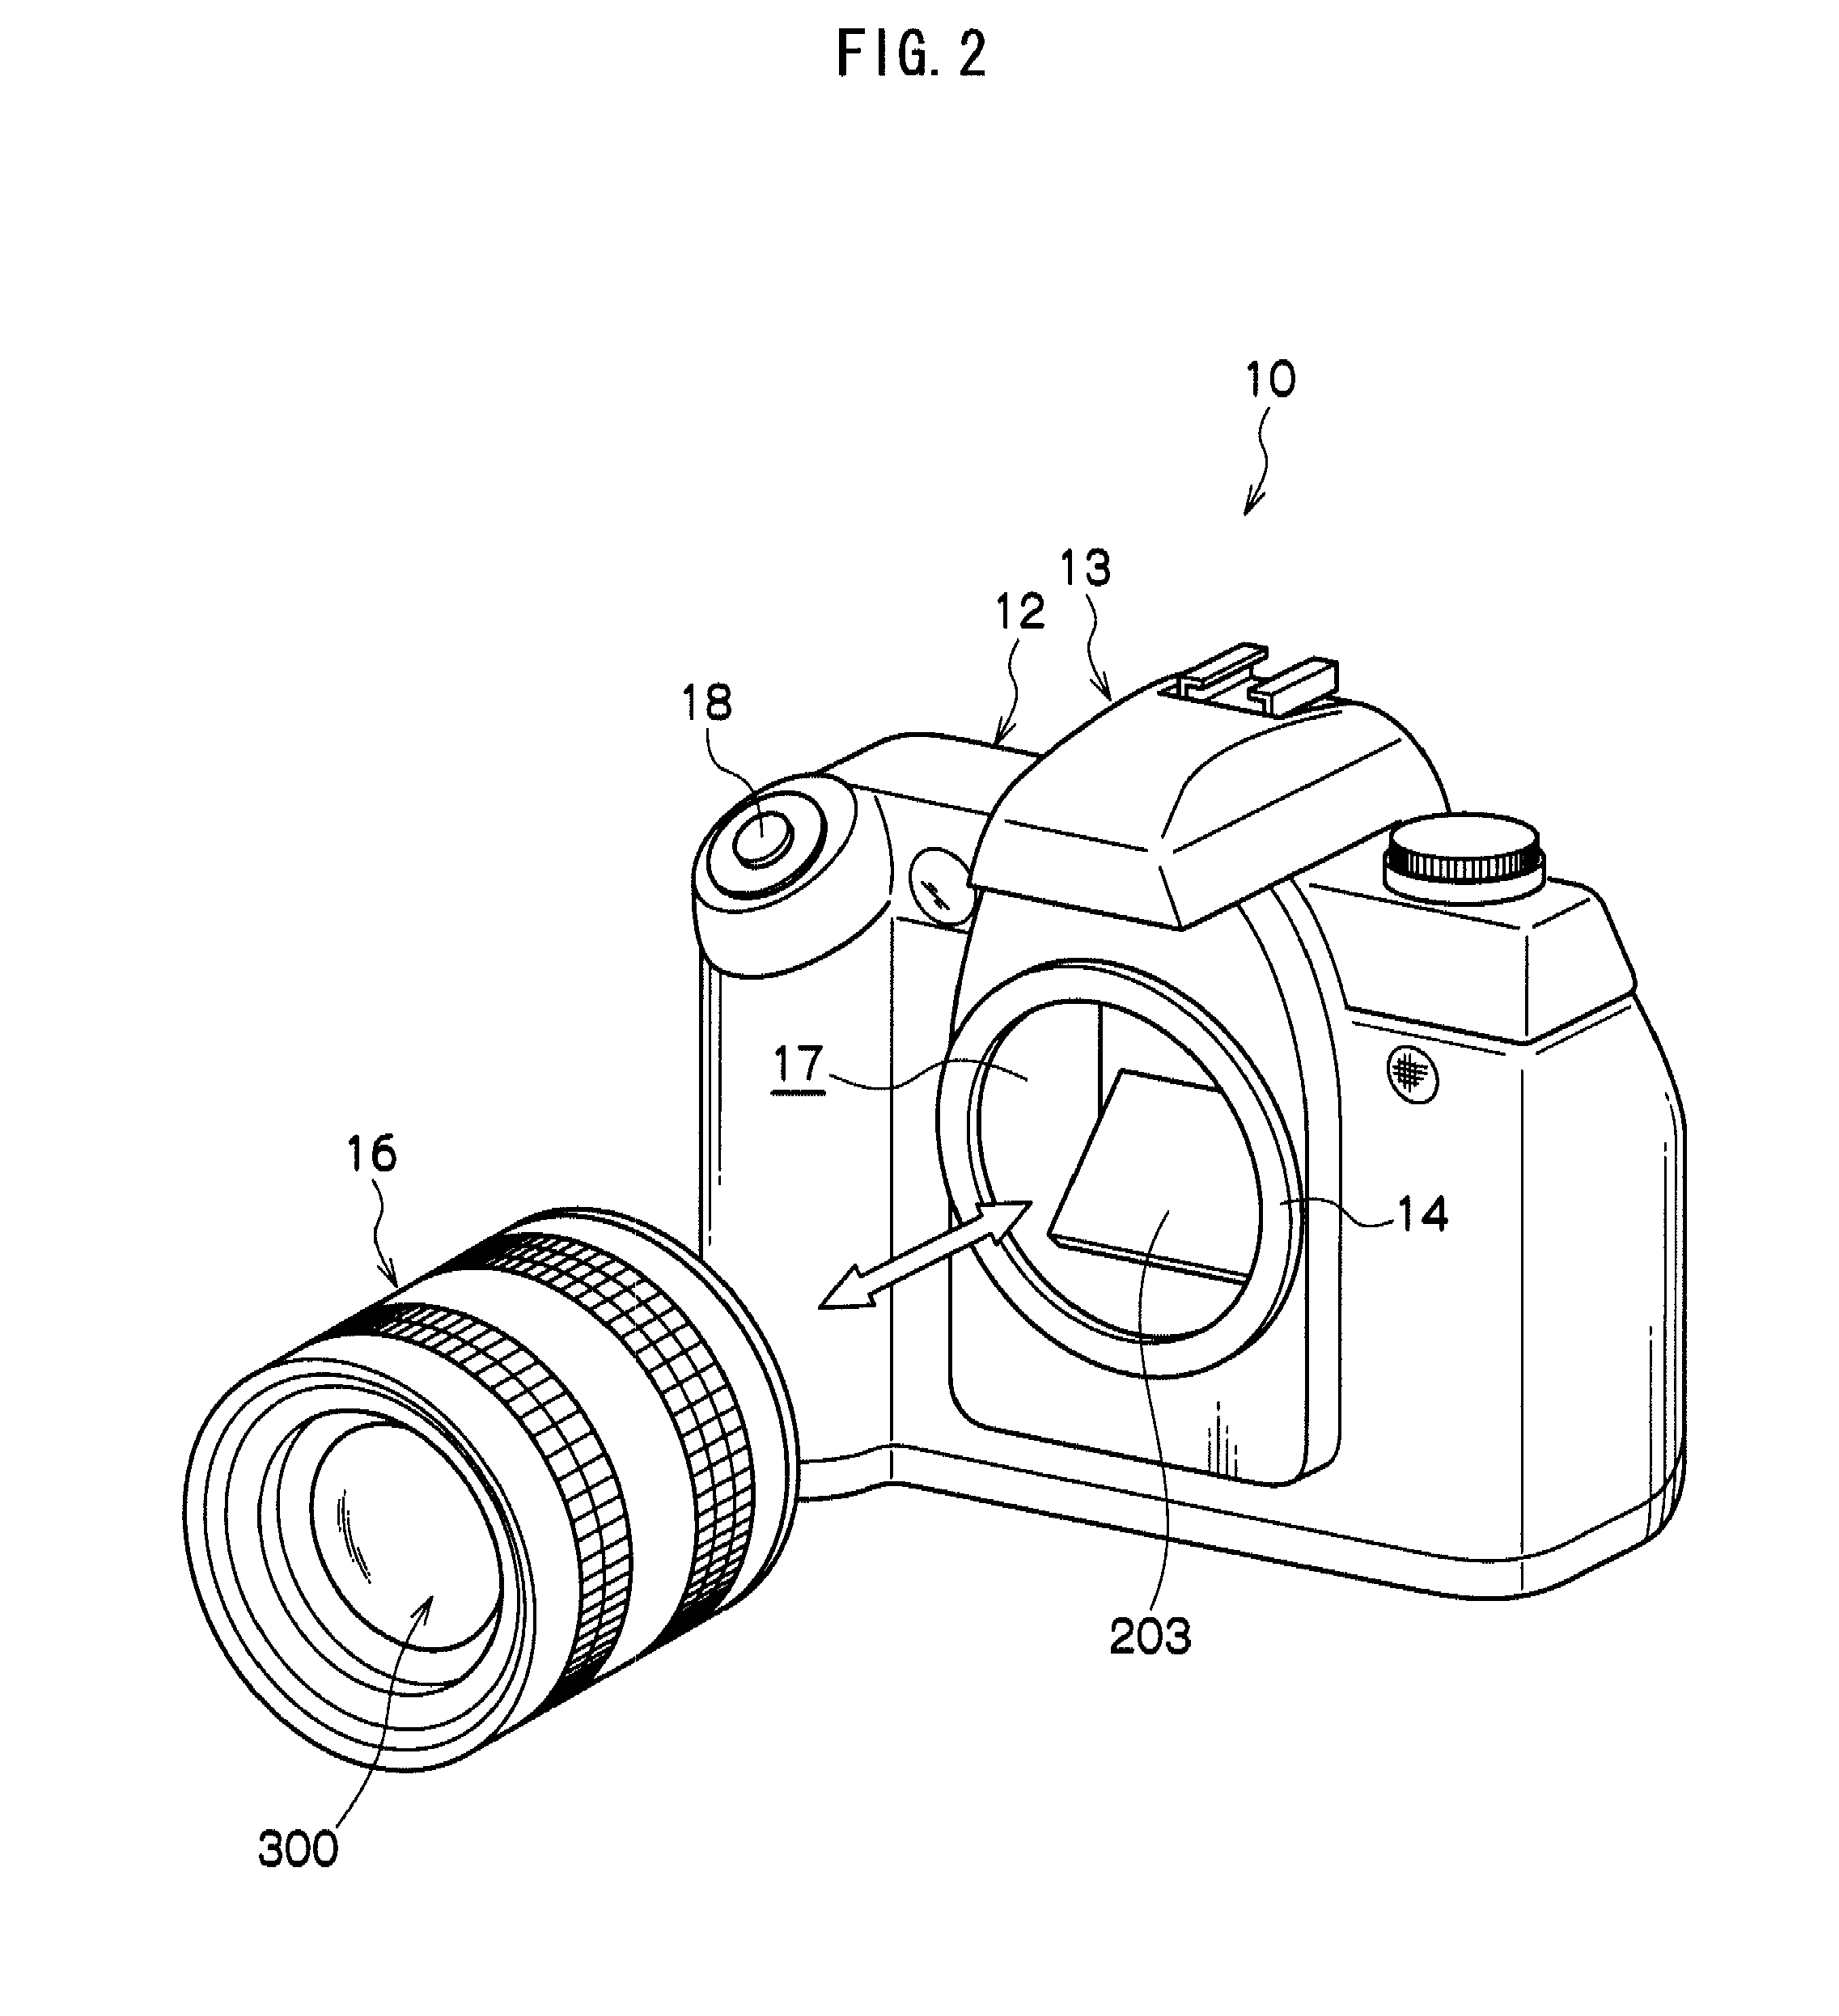 Image capture device capable of improved image capturing in electronic viewfinder mode